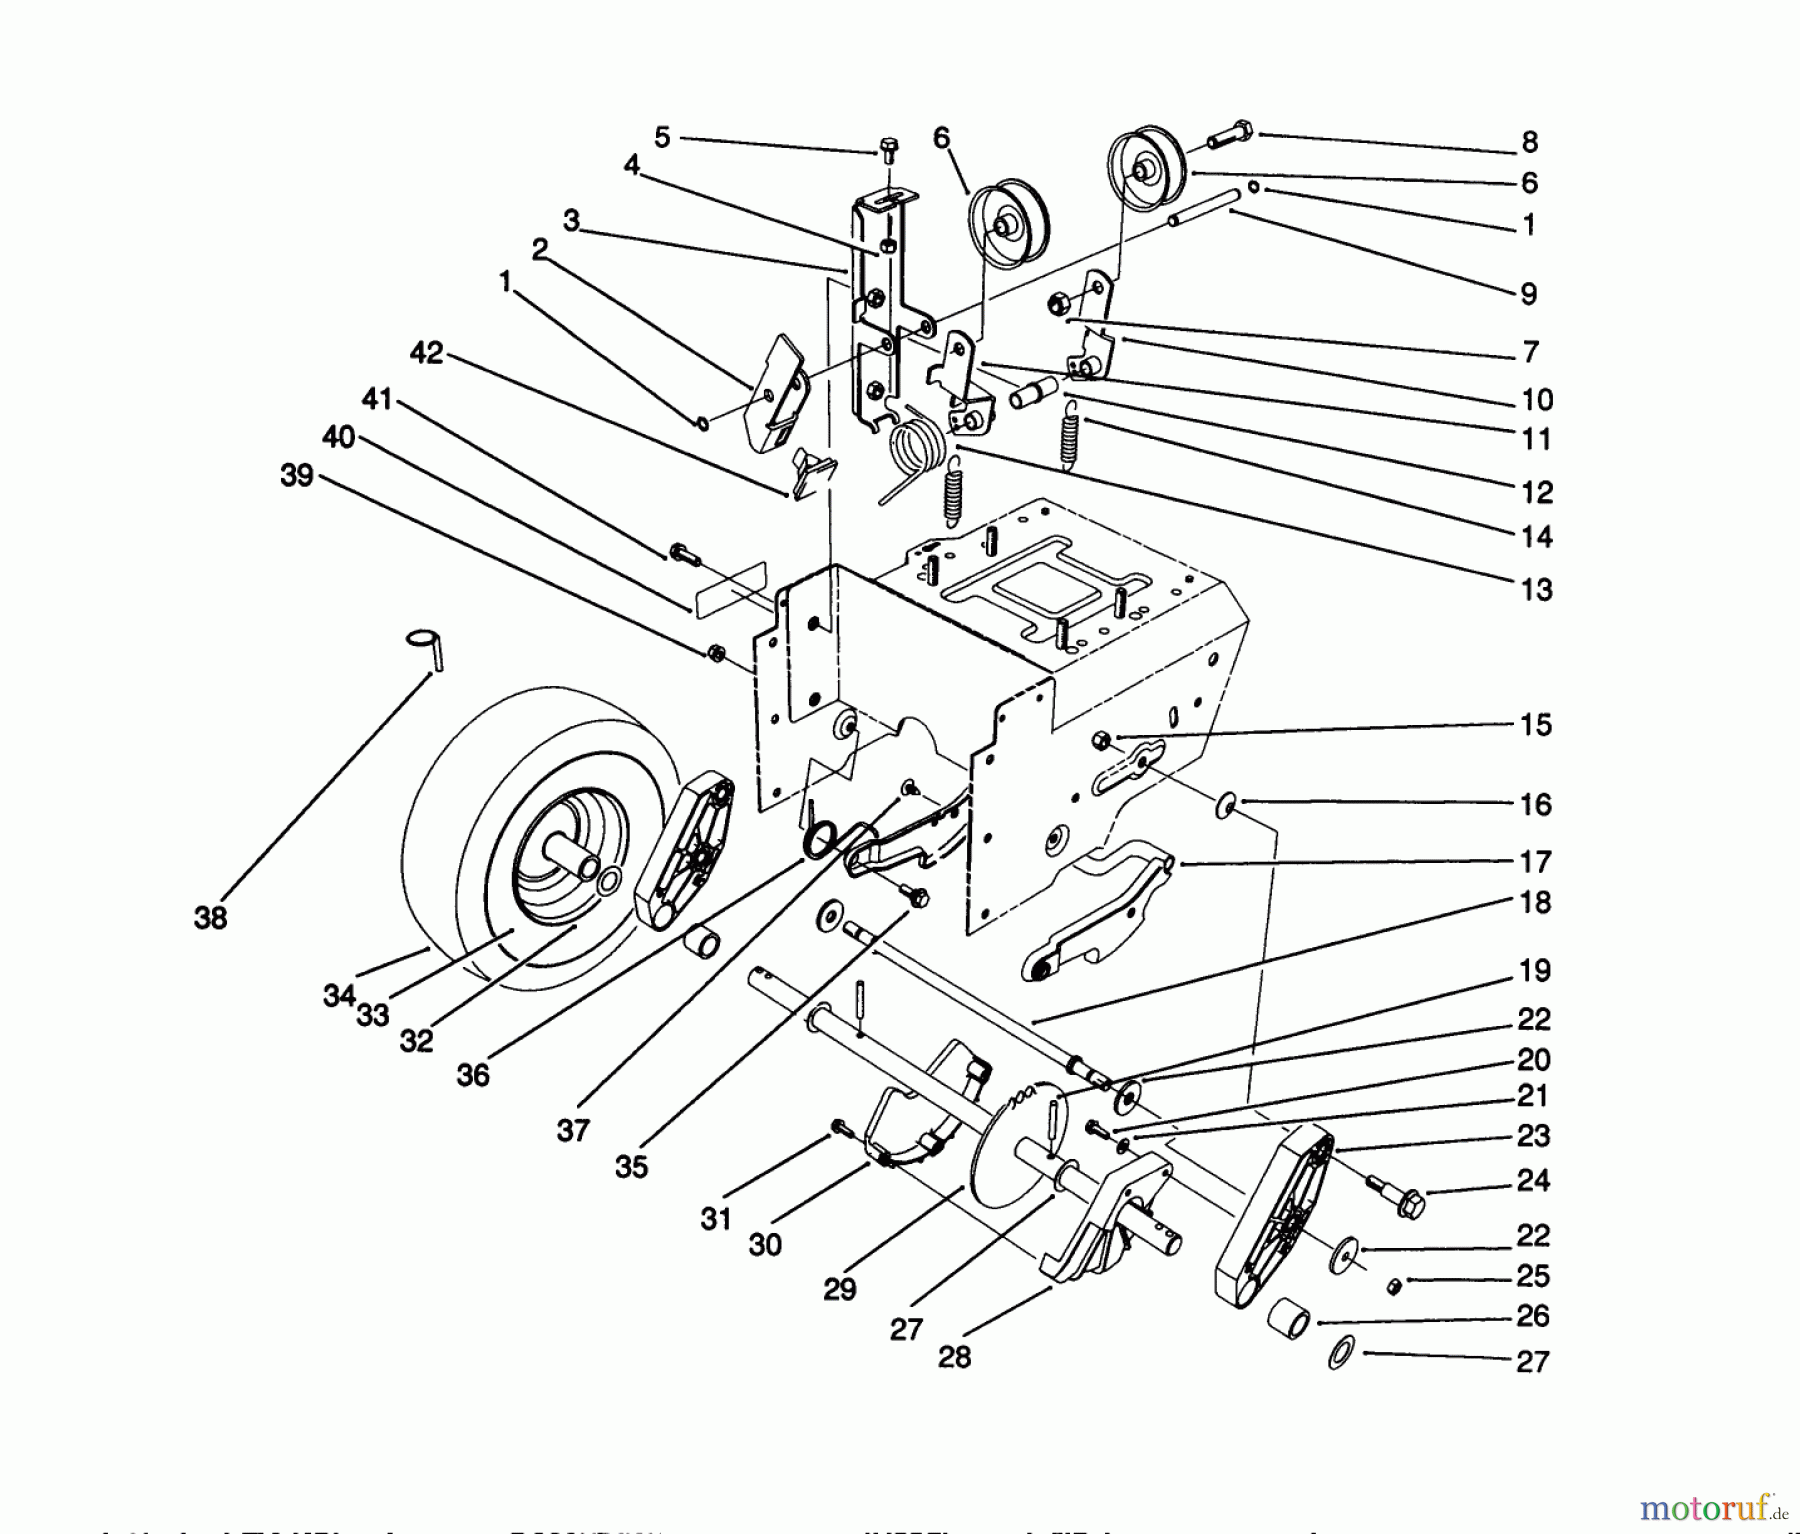  Toro Neu Snow Blowers/Snow Throwers Seite 1 38543 (824) - Toro 824 Power Shift Snowthrower, 1991 (1000001-1999999) TRACTION DRIVE ASSEMBLY